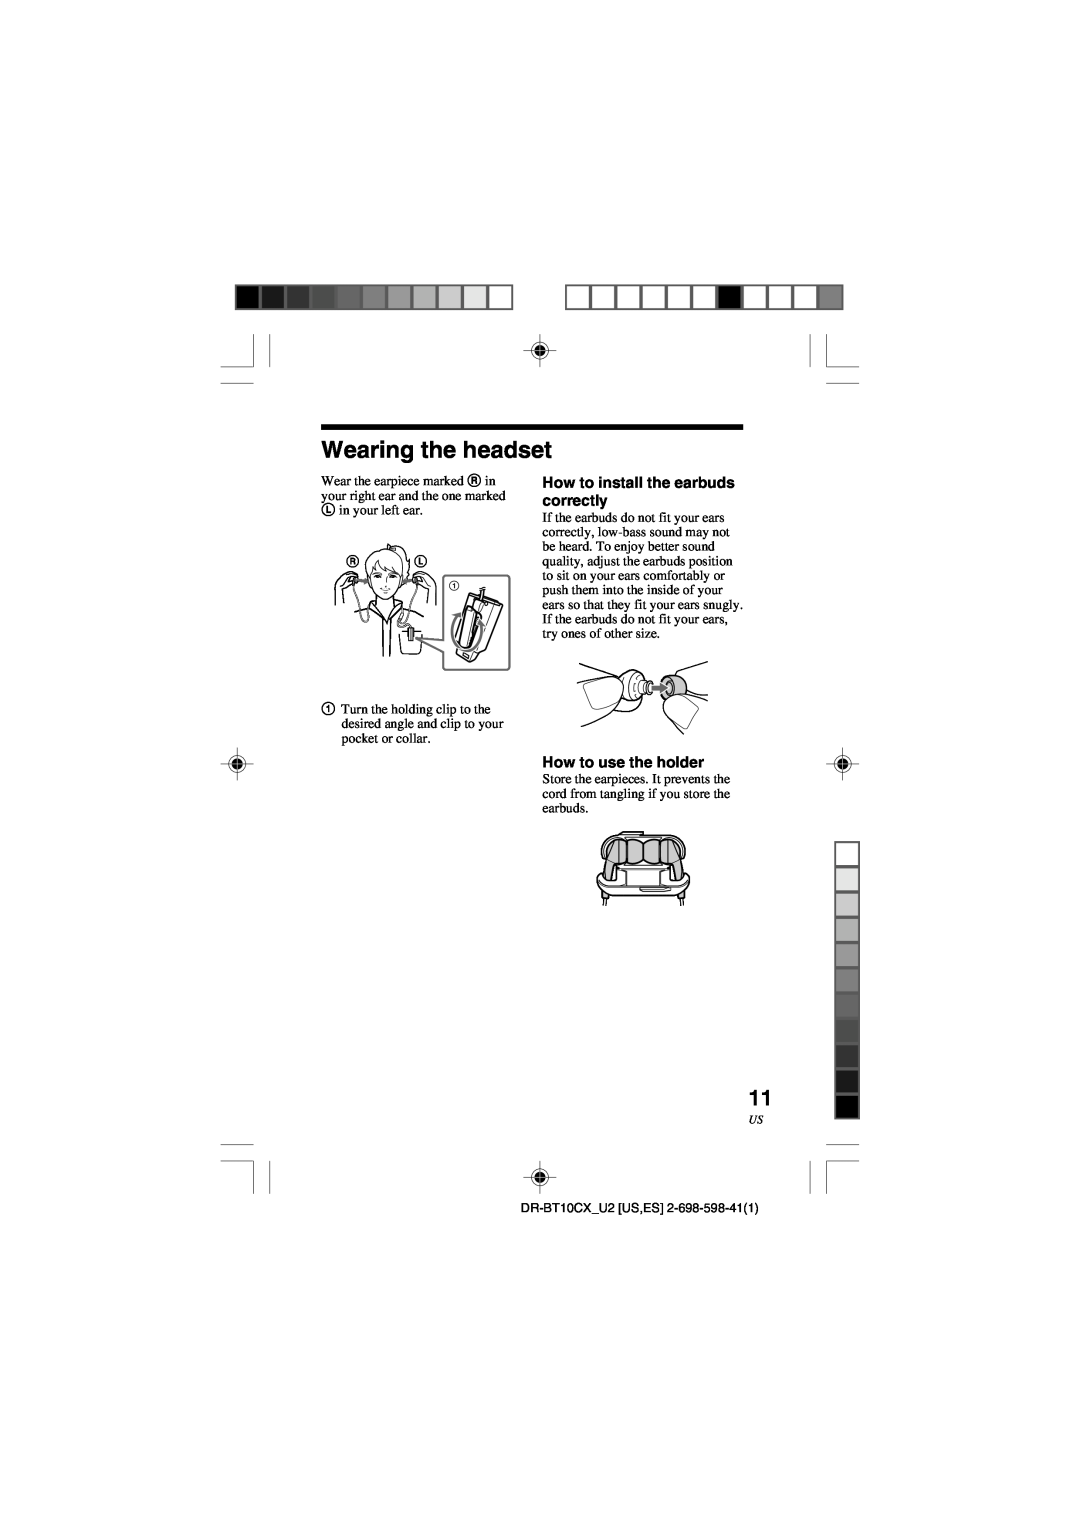 Sony DRBT10CX operating instructions Wearing the headset, How to install the earbuds correctly, How to use the holder 